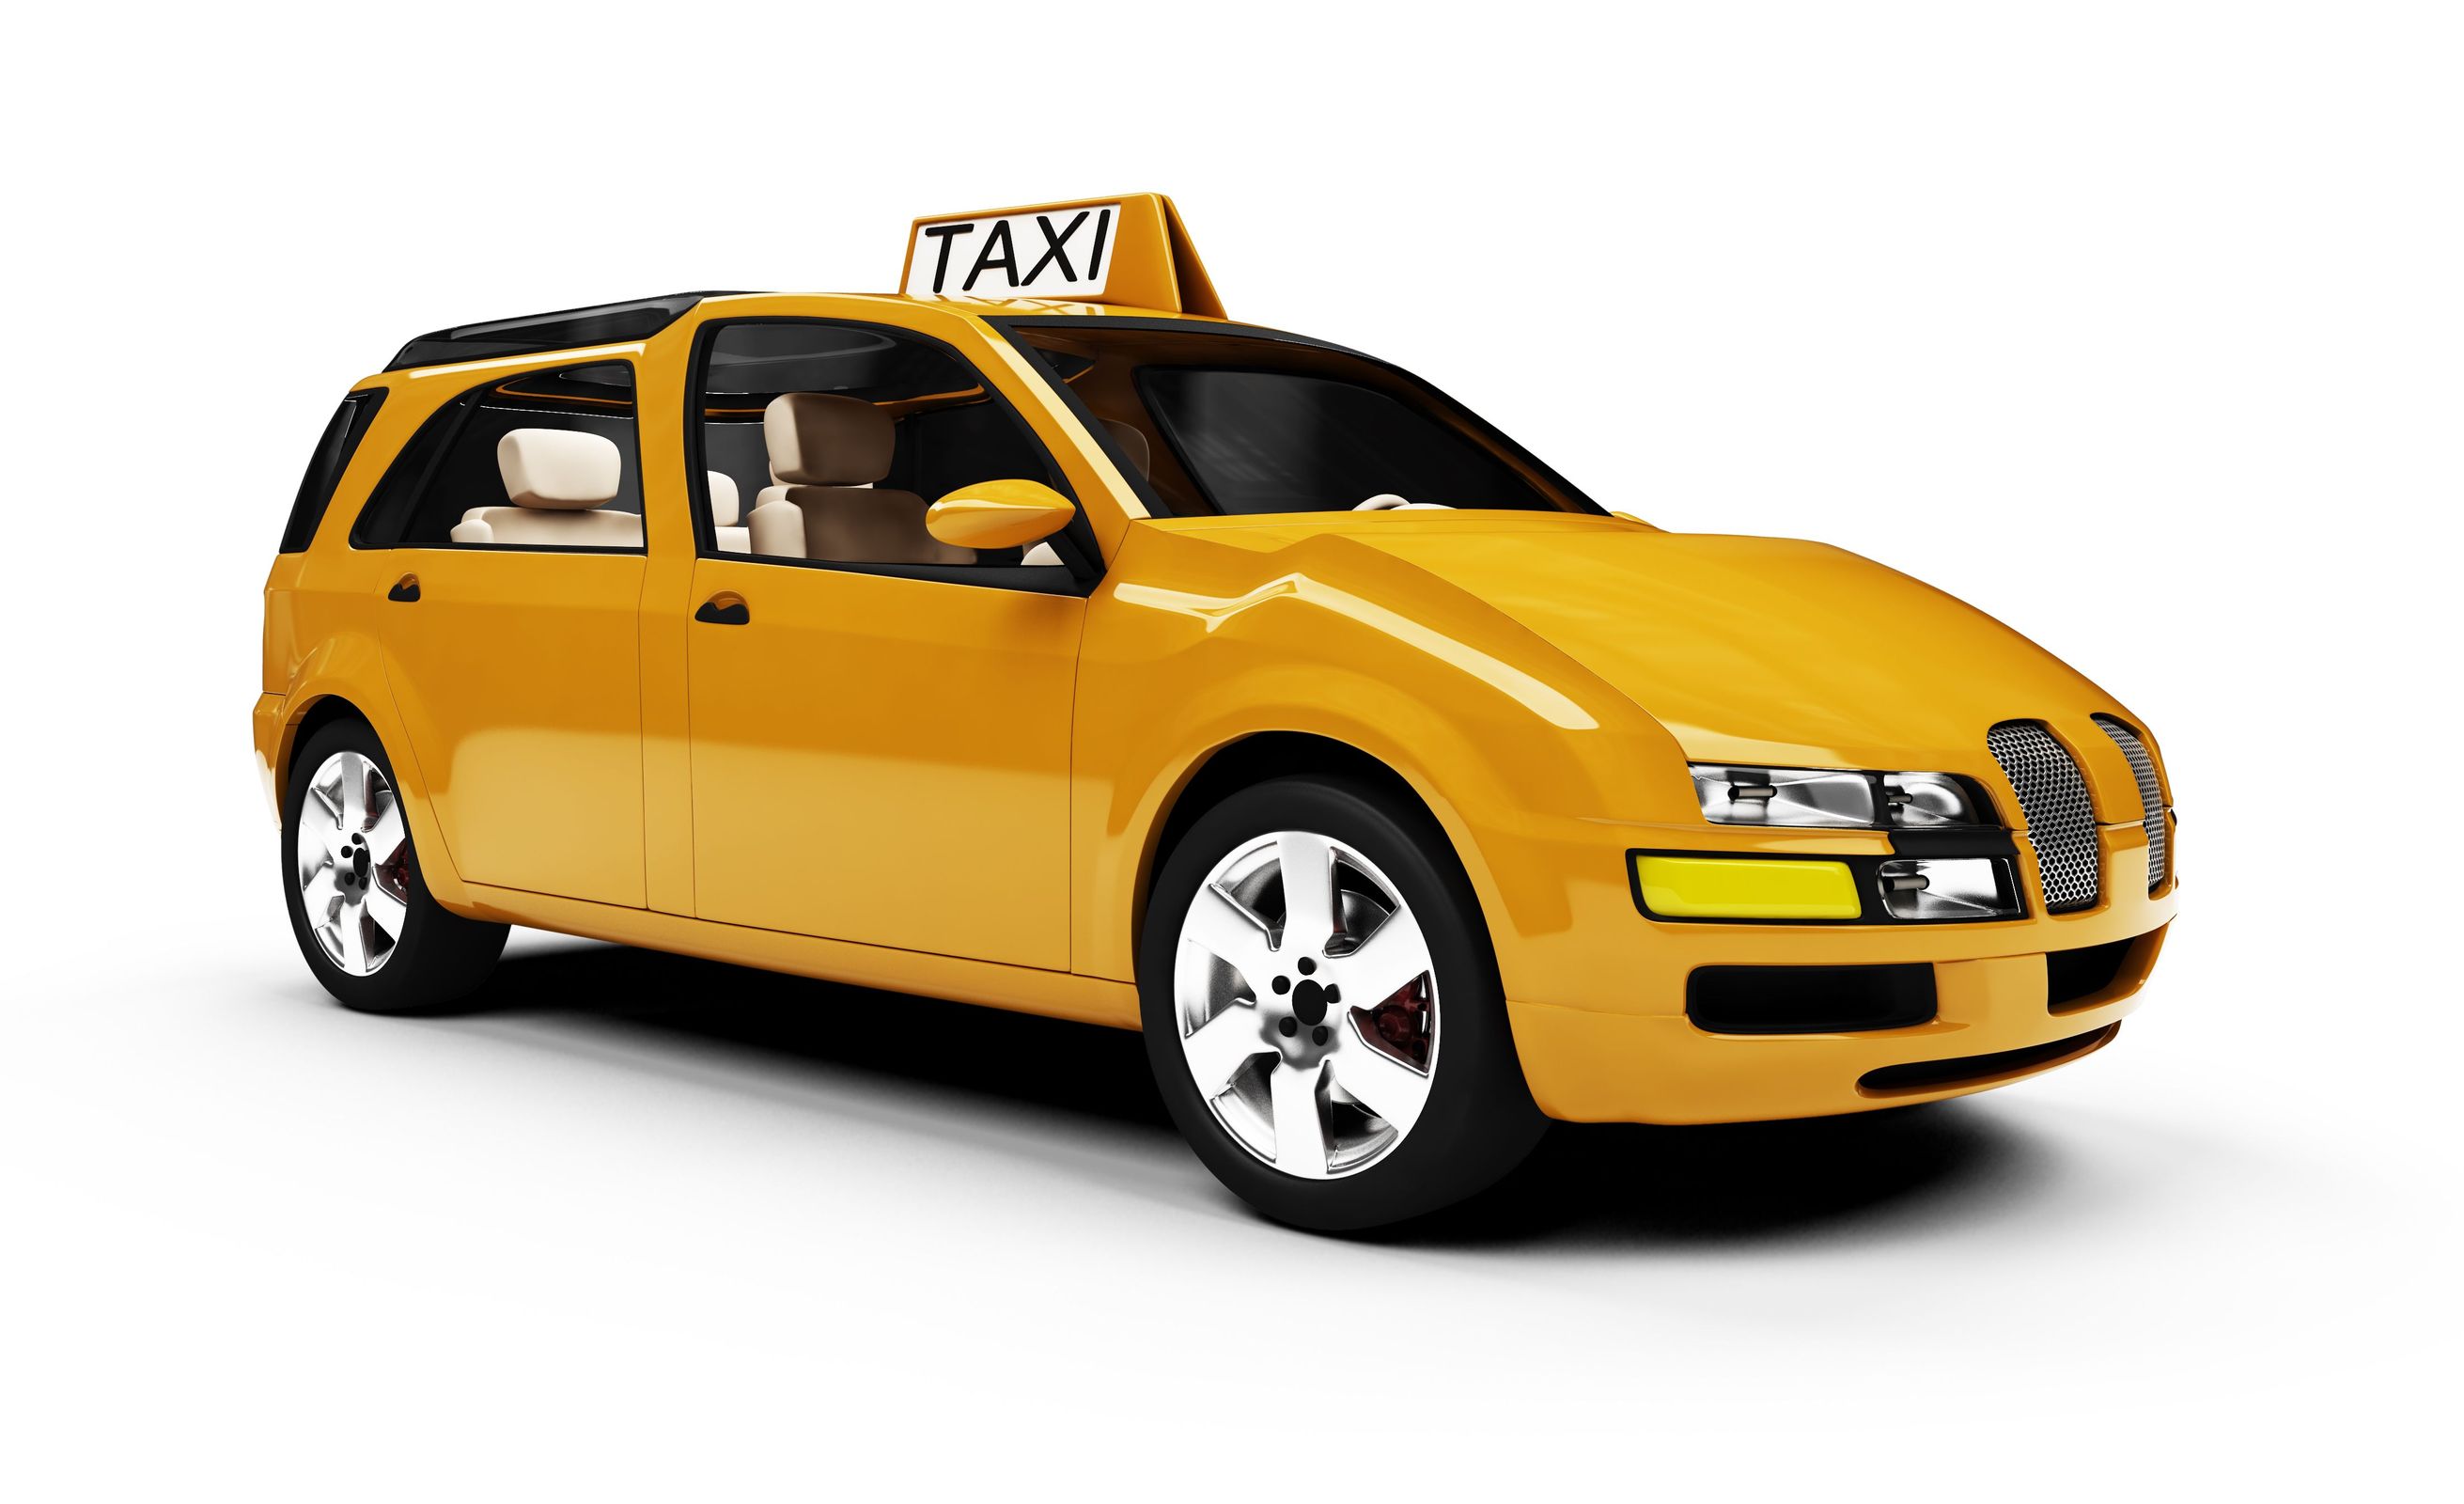 Taxi Carson: Finding and Selecting the Best Taxi Service